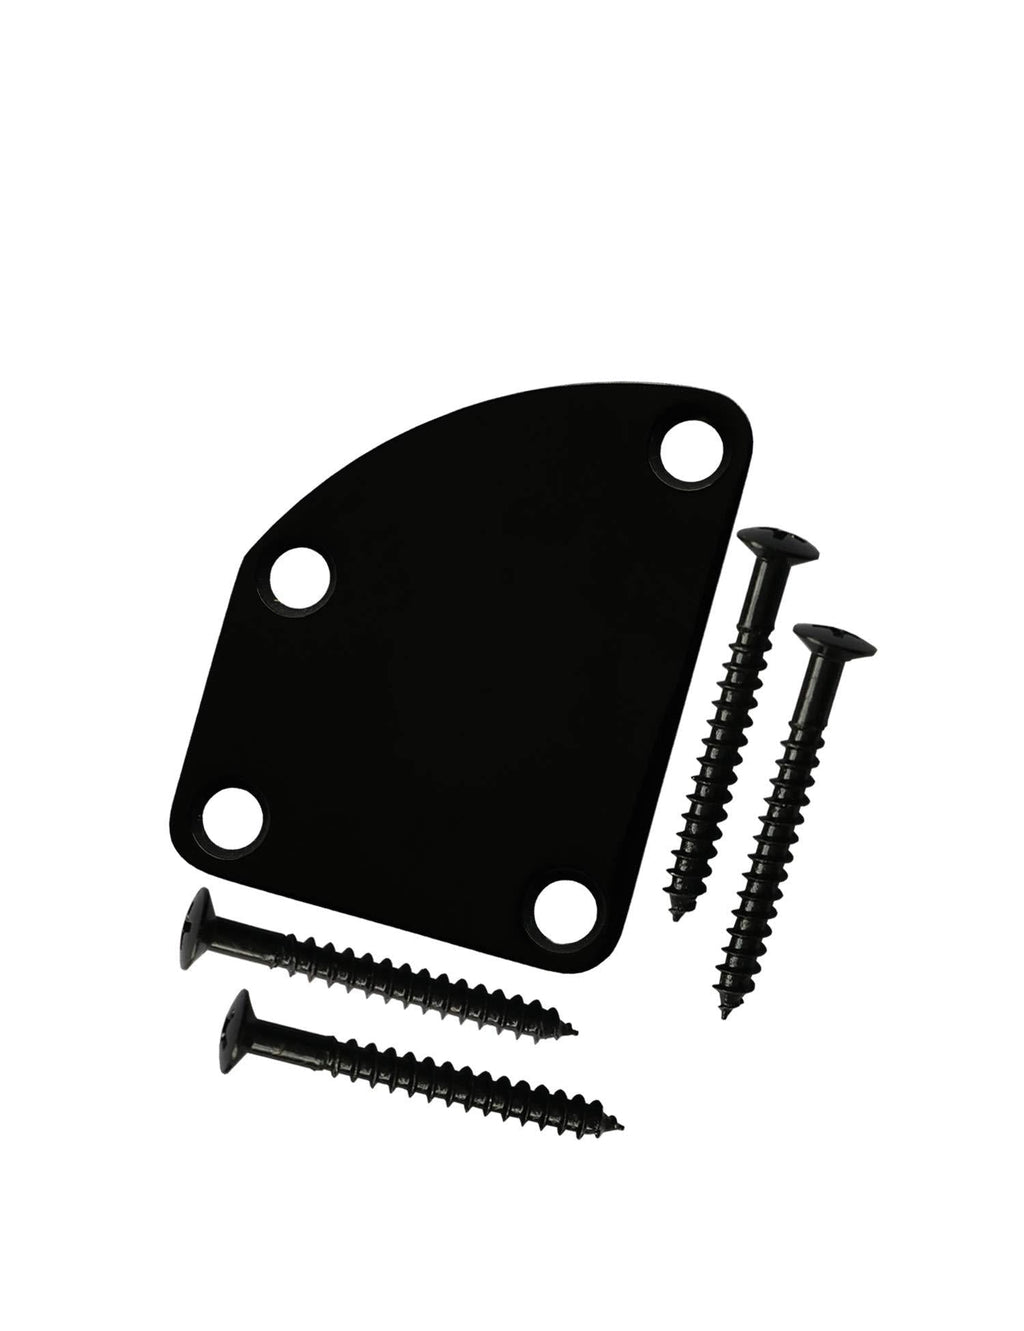 Metallor Electric Guitar Neck Plate Curved Cutaway Semi Round Neck Joint Back Mounting Plate 4 Holes with Screws Compatible with Stratocaster Telecaster Style Guitar Bass Parts Replacement Black